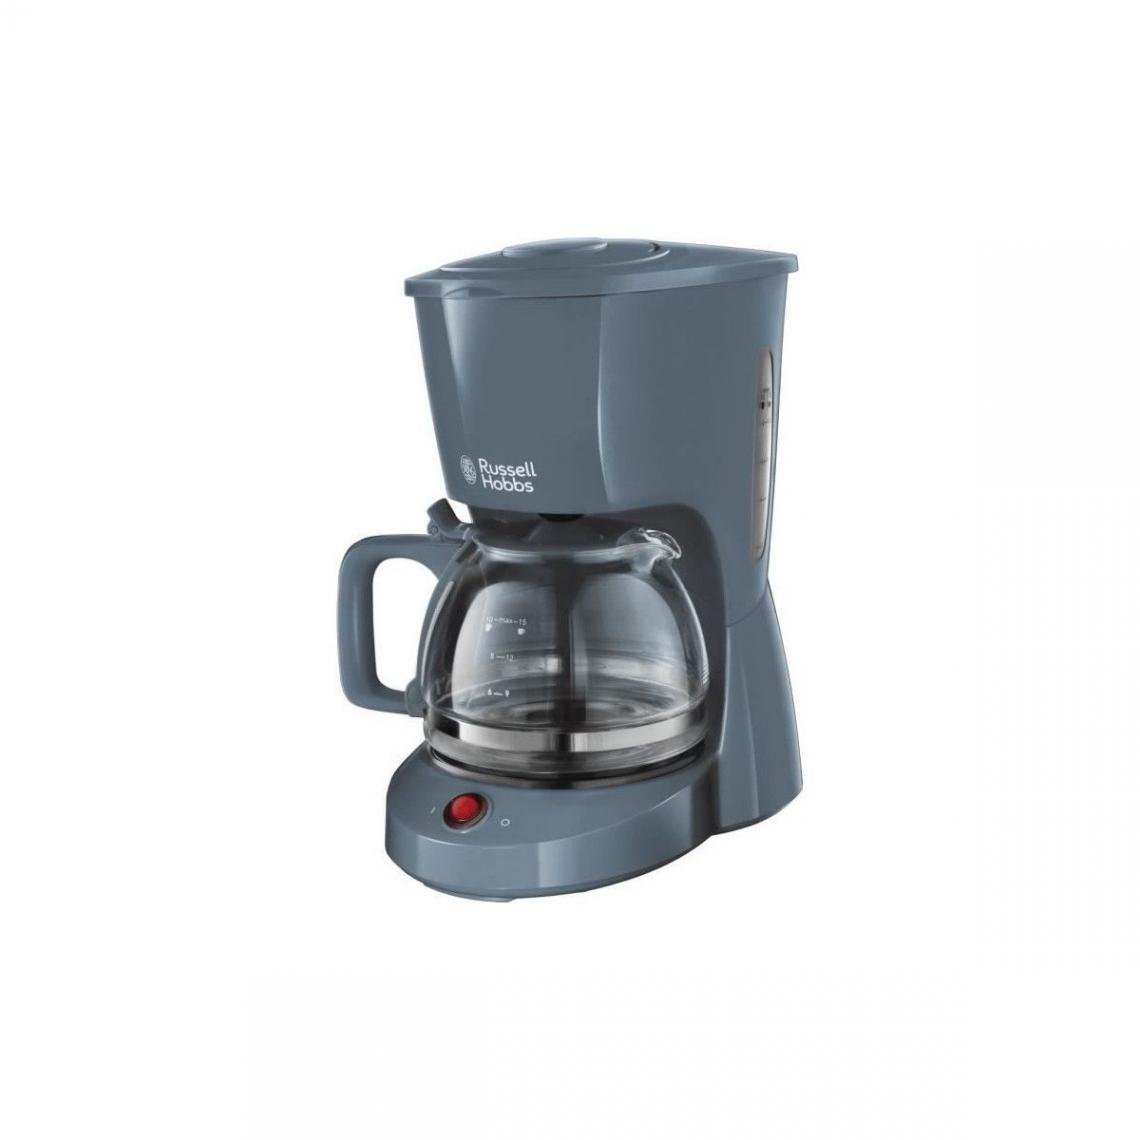 Russell Hobbs - Russell Hobbs 22613-56 Machine A Cafe, Cafetiere Filtre 1,25l Texture, Grande Capacite - Gris - Expresso - Cafetière